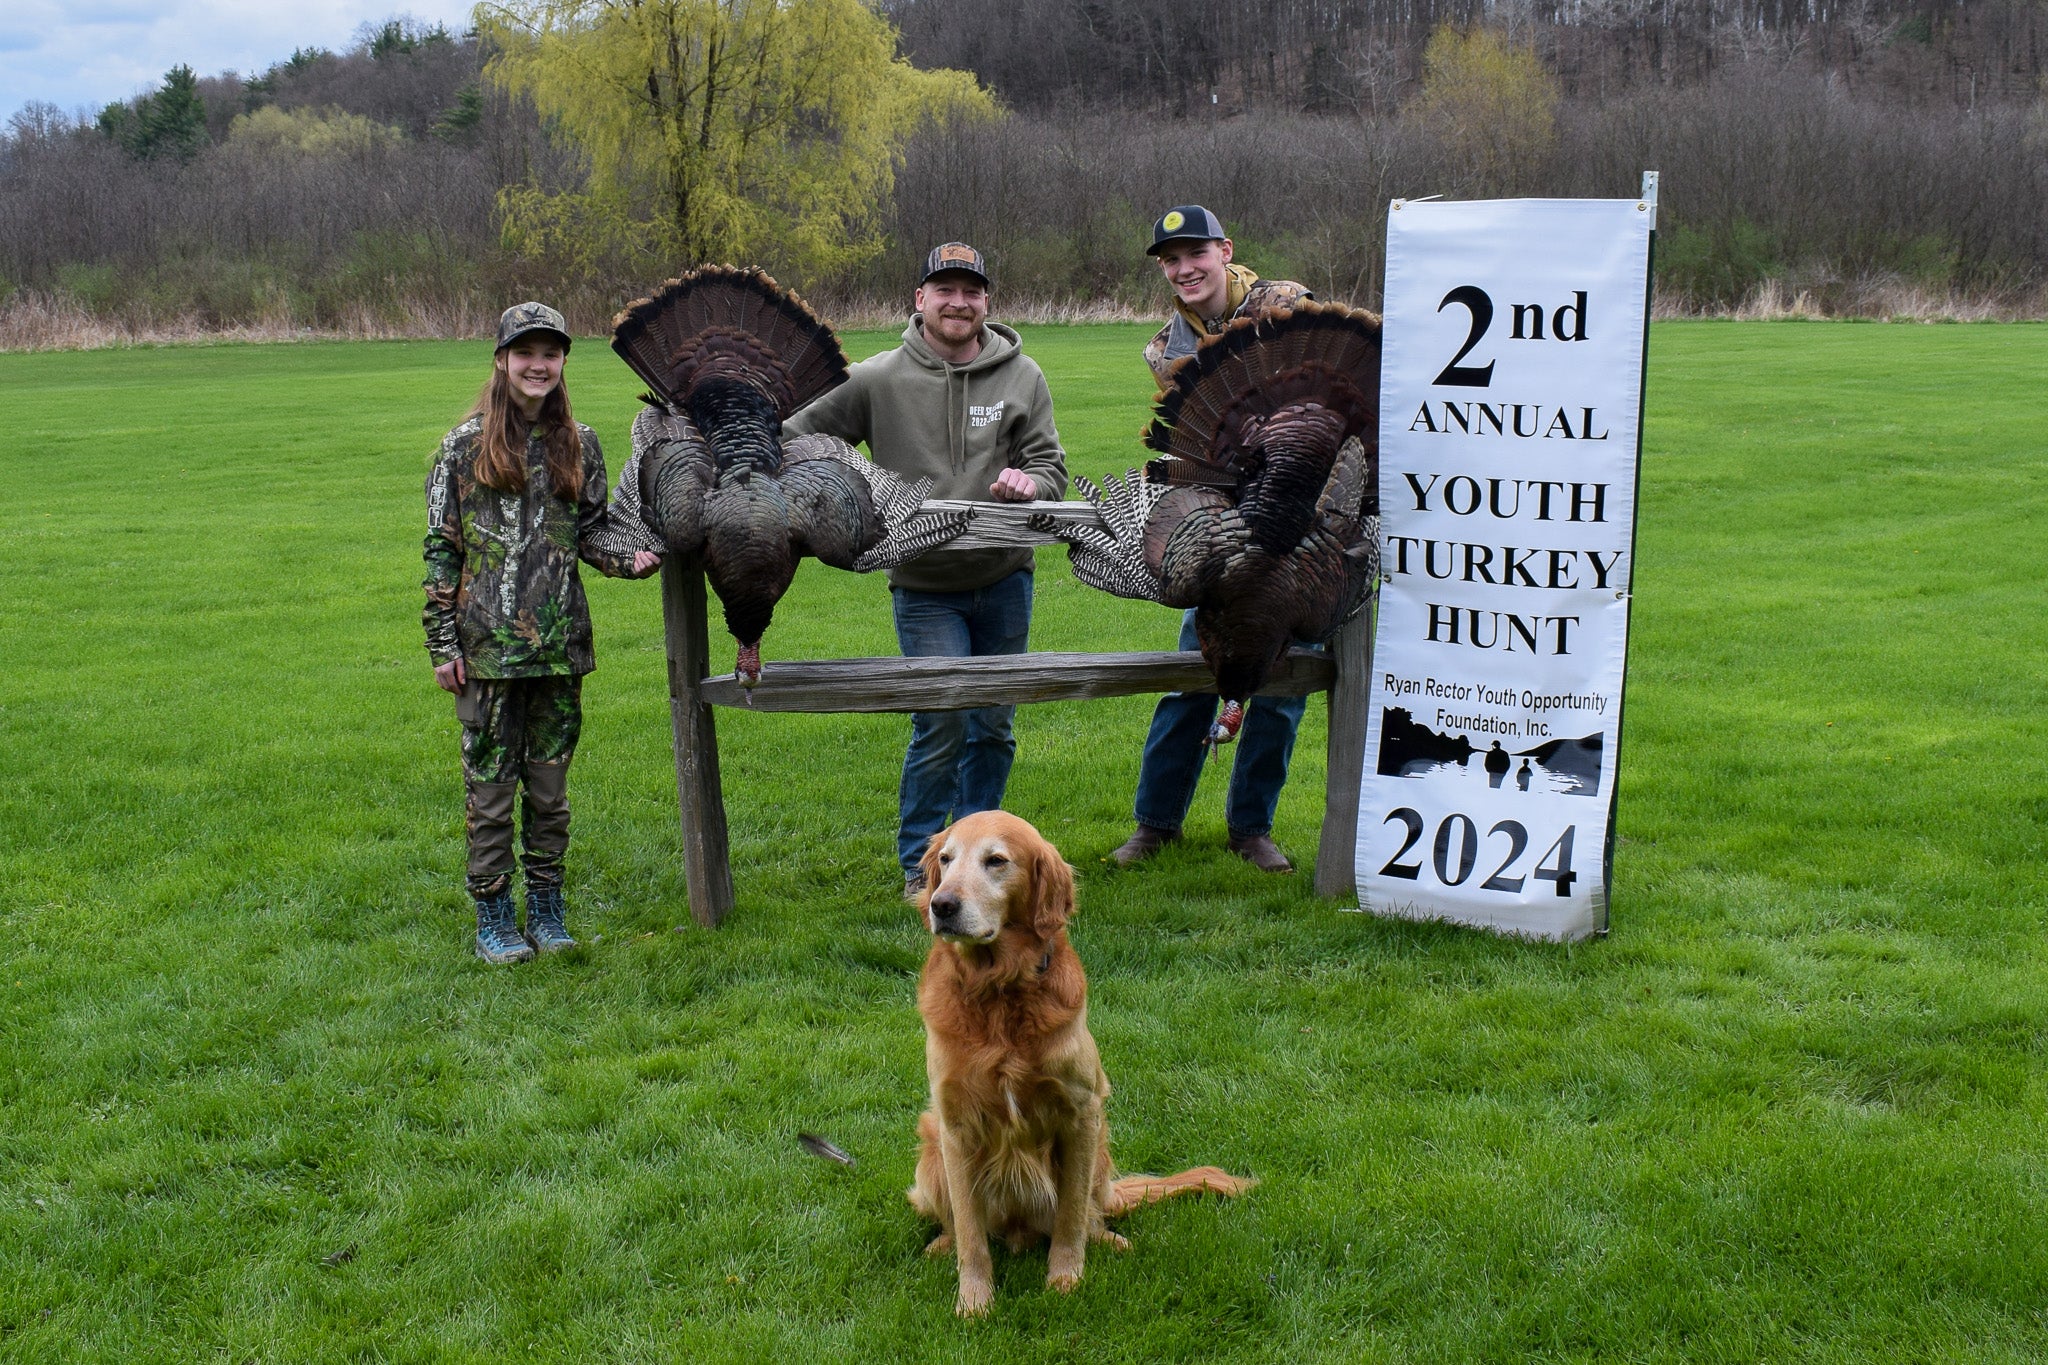 Ryan Rector Youth Opportunity Foundation's 2nd Annual Turkey Hunt 